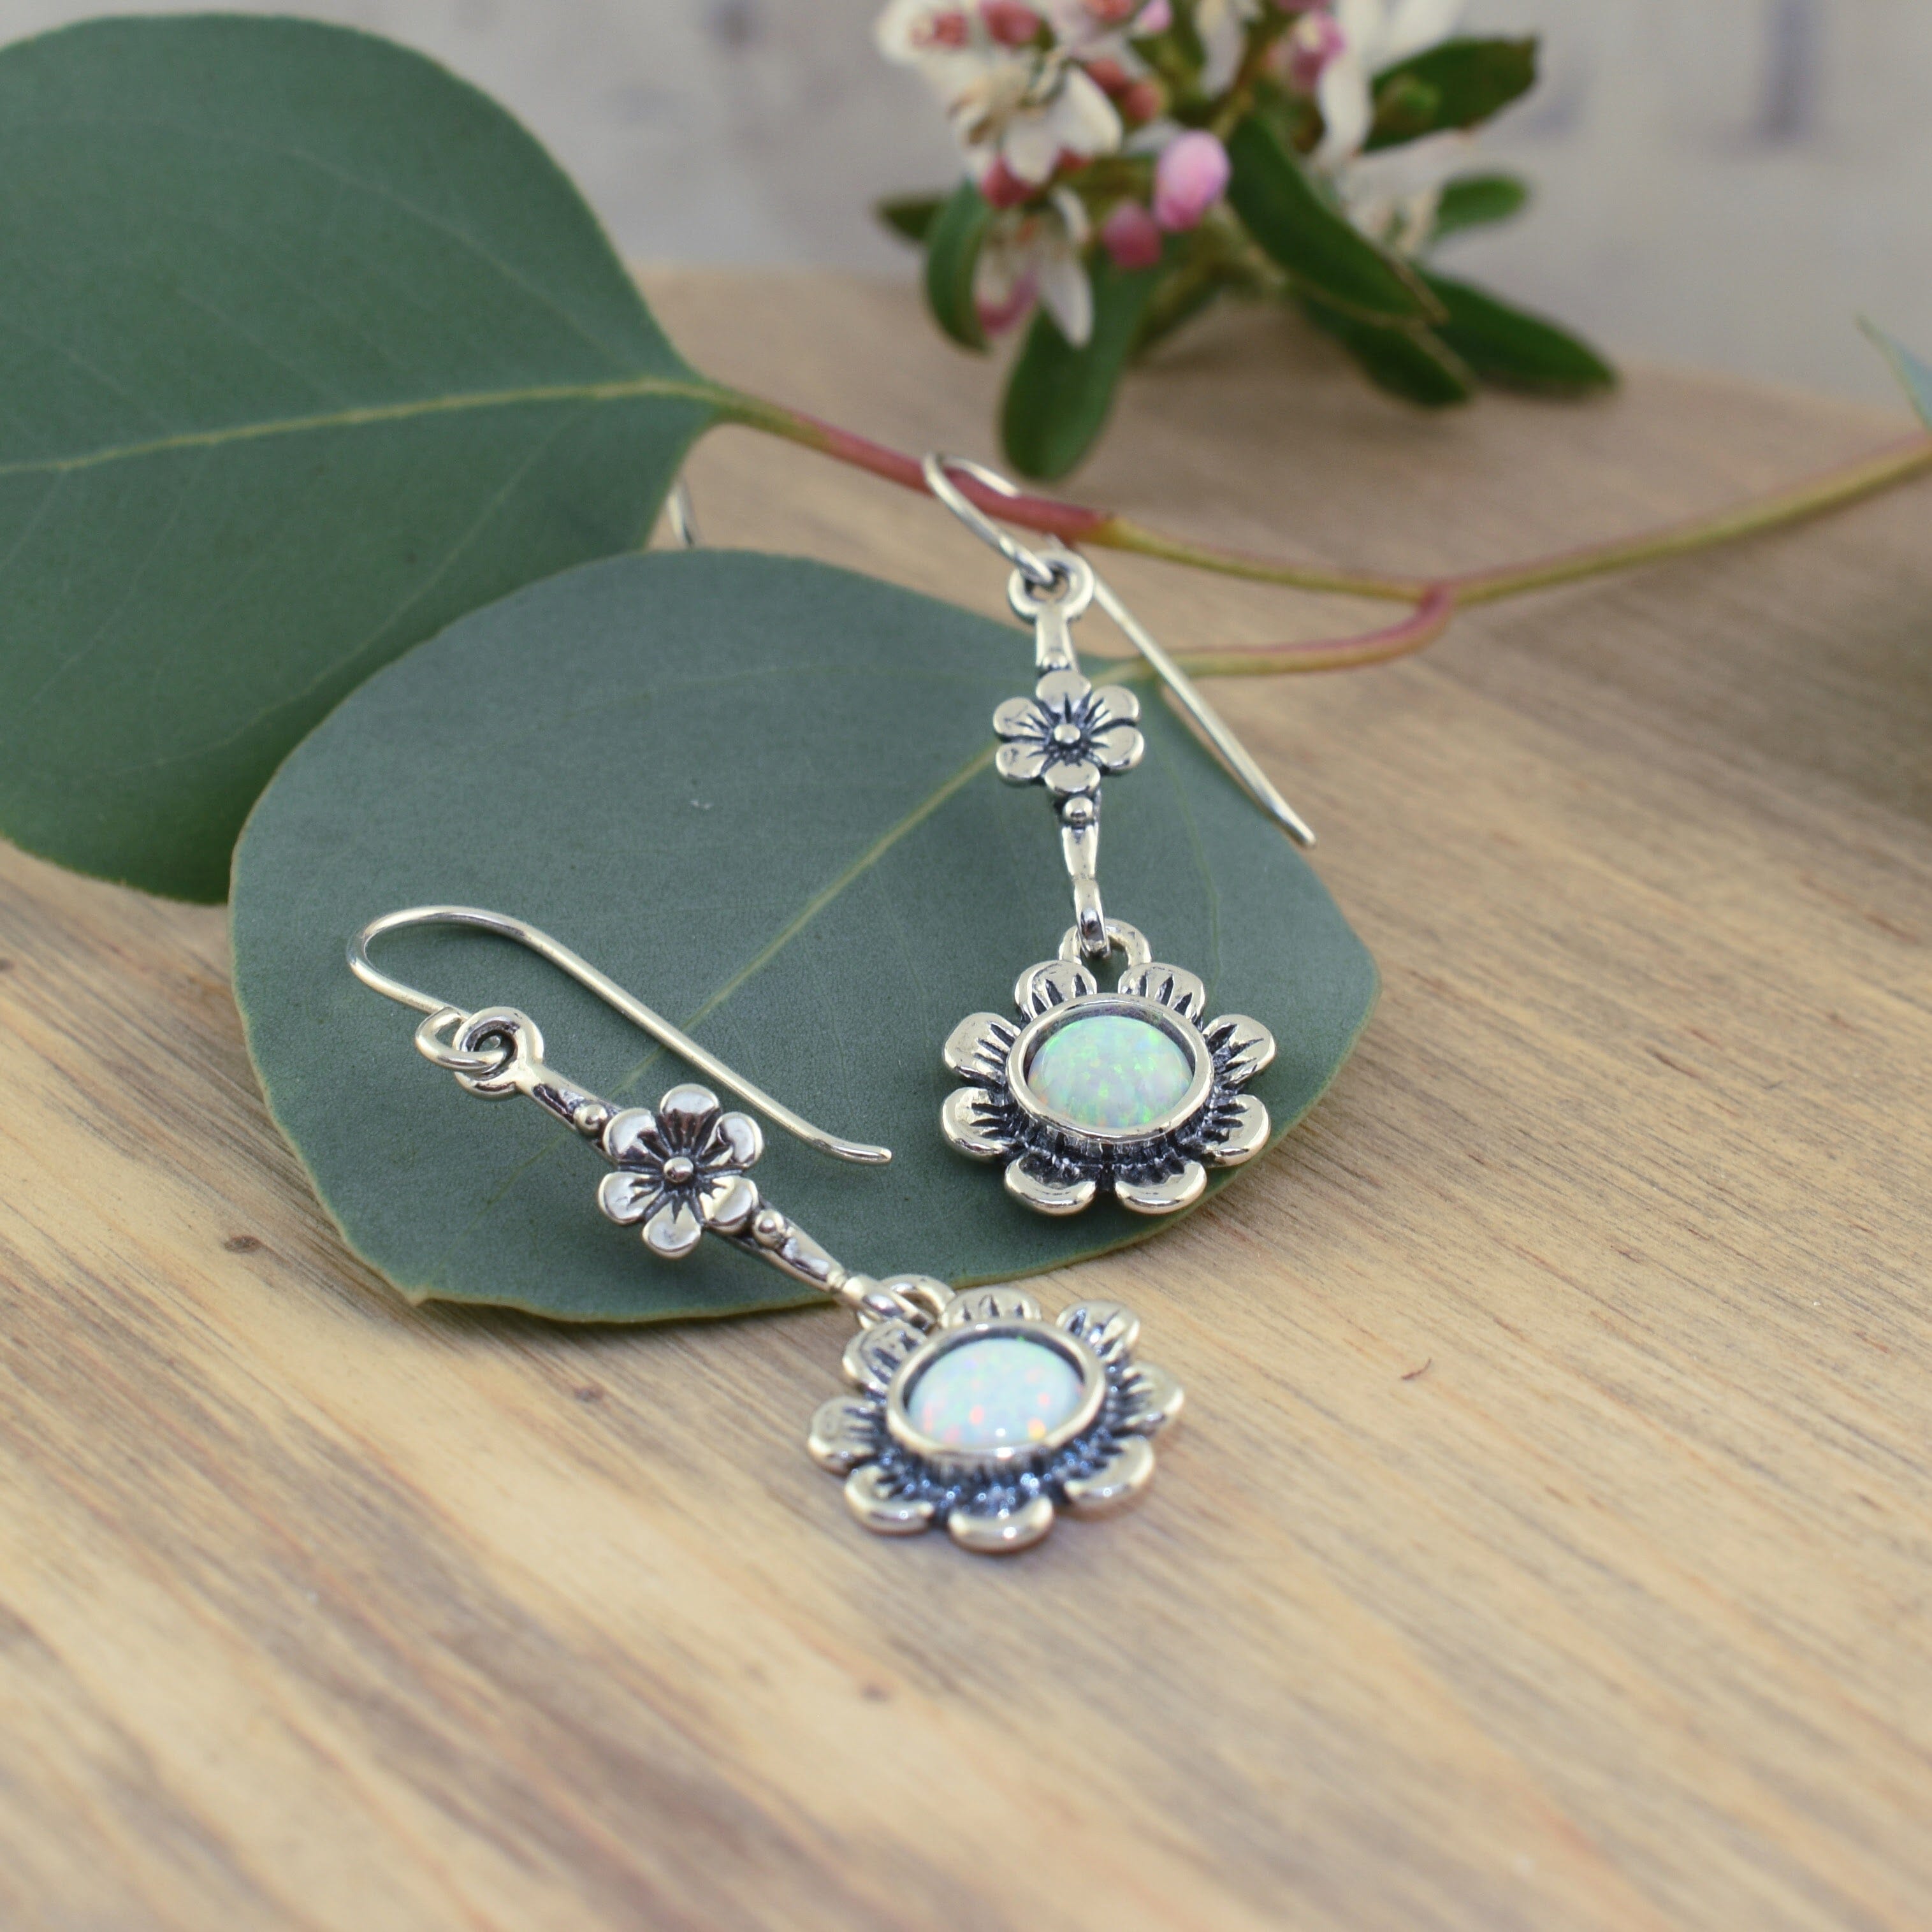 dangling sterling silver flower earrings with white reconstructed opal stones